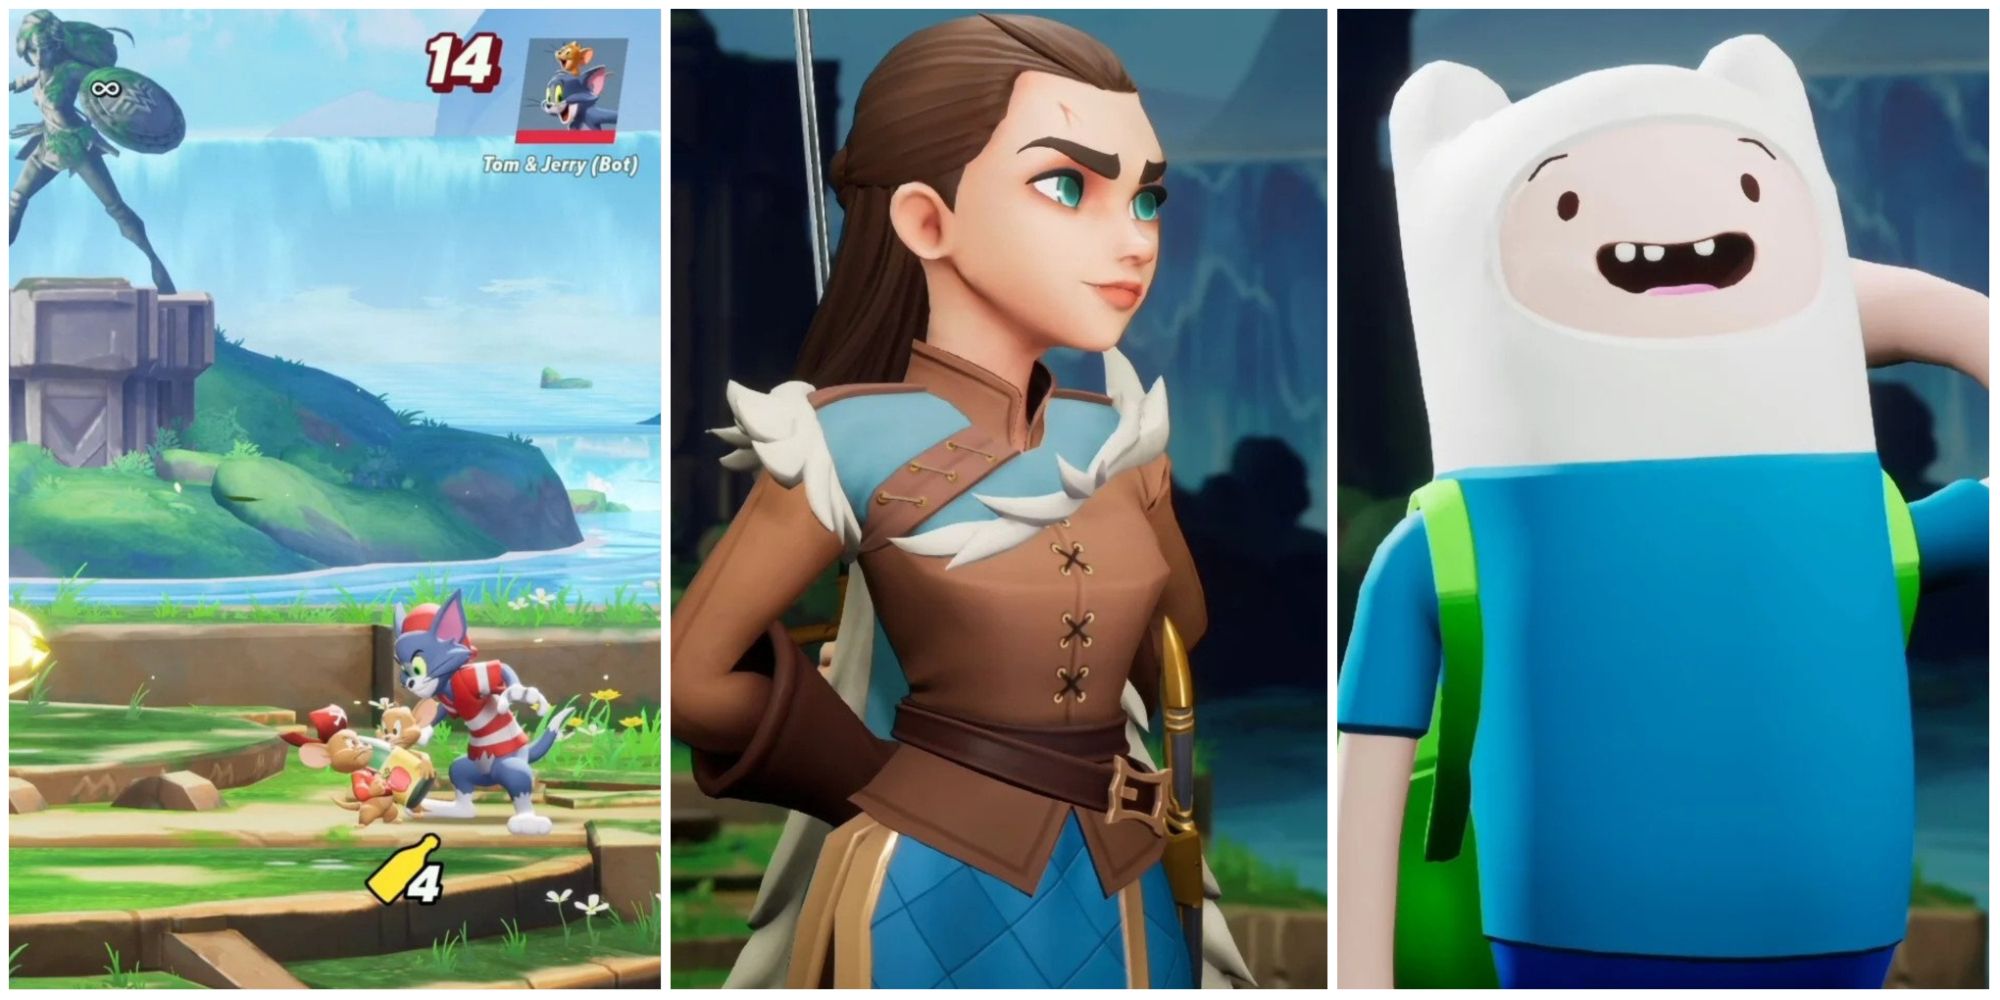 Split Image of MultiVersus Fighters from left to right: Tom and Jerry, Arya, and Finn